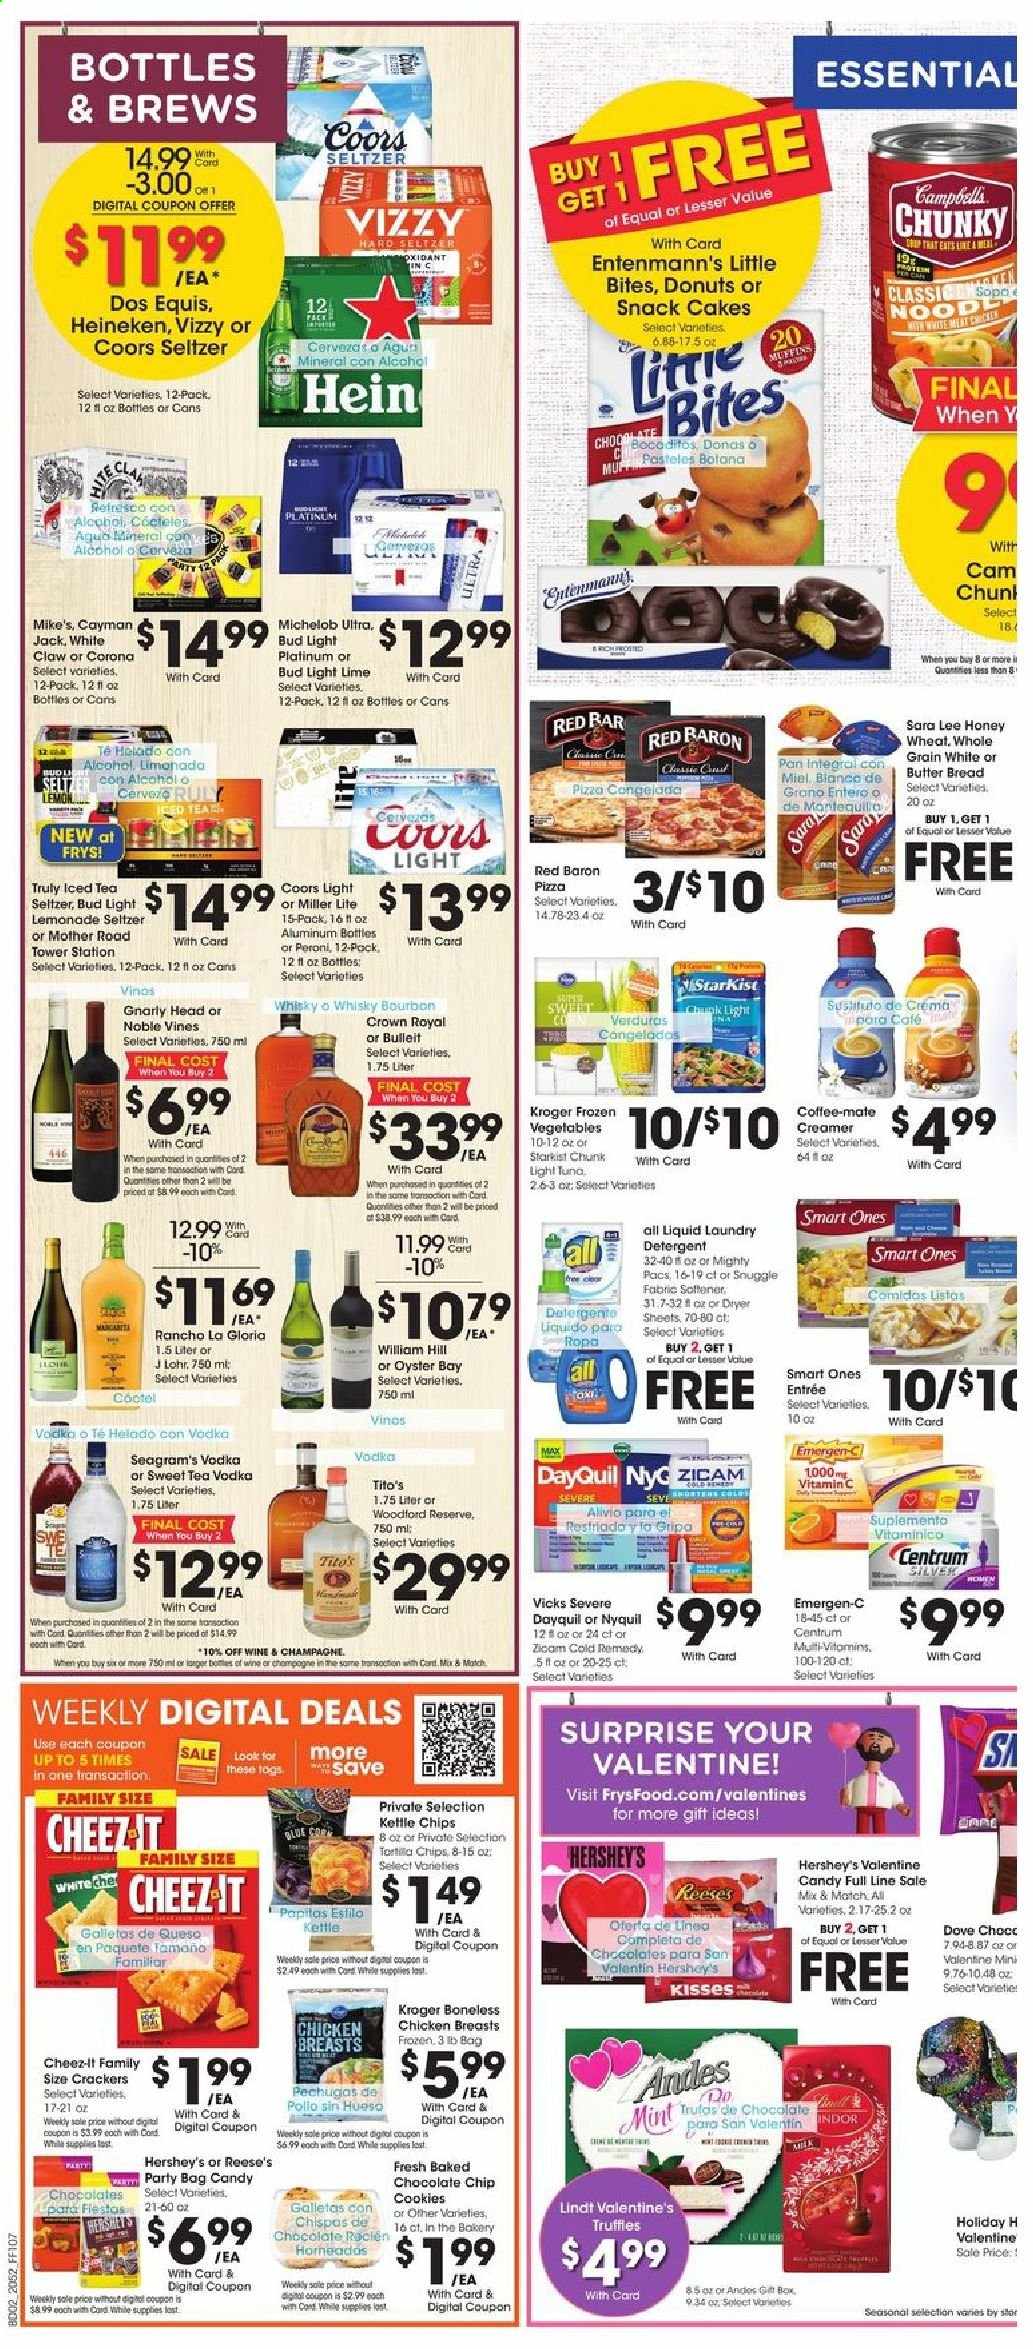 thumbnail - Fry’s Flyer - 01/27/2021 - 02/02/2021 - Sales products - bread, Sara Lee, cake, donut, muffin, Entenmann's, Little Bites, tuna, StarKist, pizza, Coffee-Mate, creamer, Reese's, Hershey's, Red Baron, cookies, Lindt, truffles, crackers, snack, light tuna, lemonade, seltzer water, champagne, wine, alcohol, bourbon, vodka, whiskey, White Claw, Hard Seltzer, TRULY, beer, Miller Lite, Coors, Dos Equis, Michelob, Bud Light, Corona Extra, Heineken, Peroni, chicken breasts, Dove, detergent, Snuggle, fabric softener, laundry detergent, dryer sheets, Vicks, pan, kettle, DayQuil, vitamin c, NyQuil, Emergen-C, Centrum. Page 4.